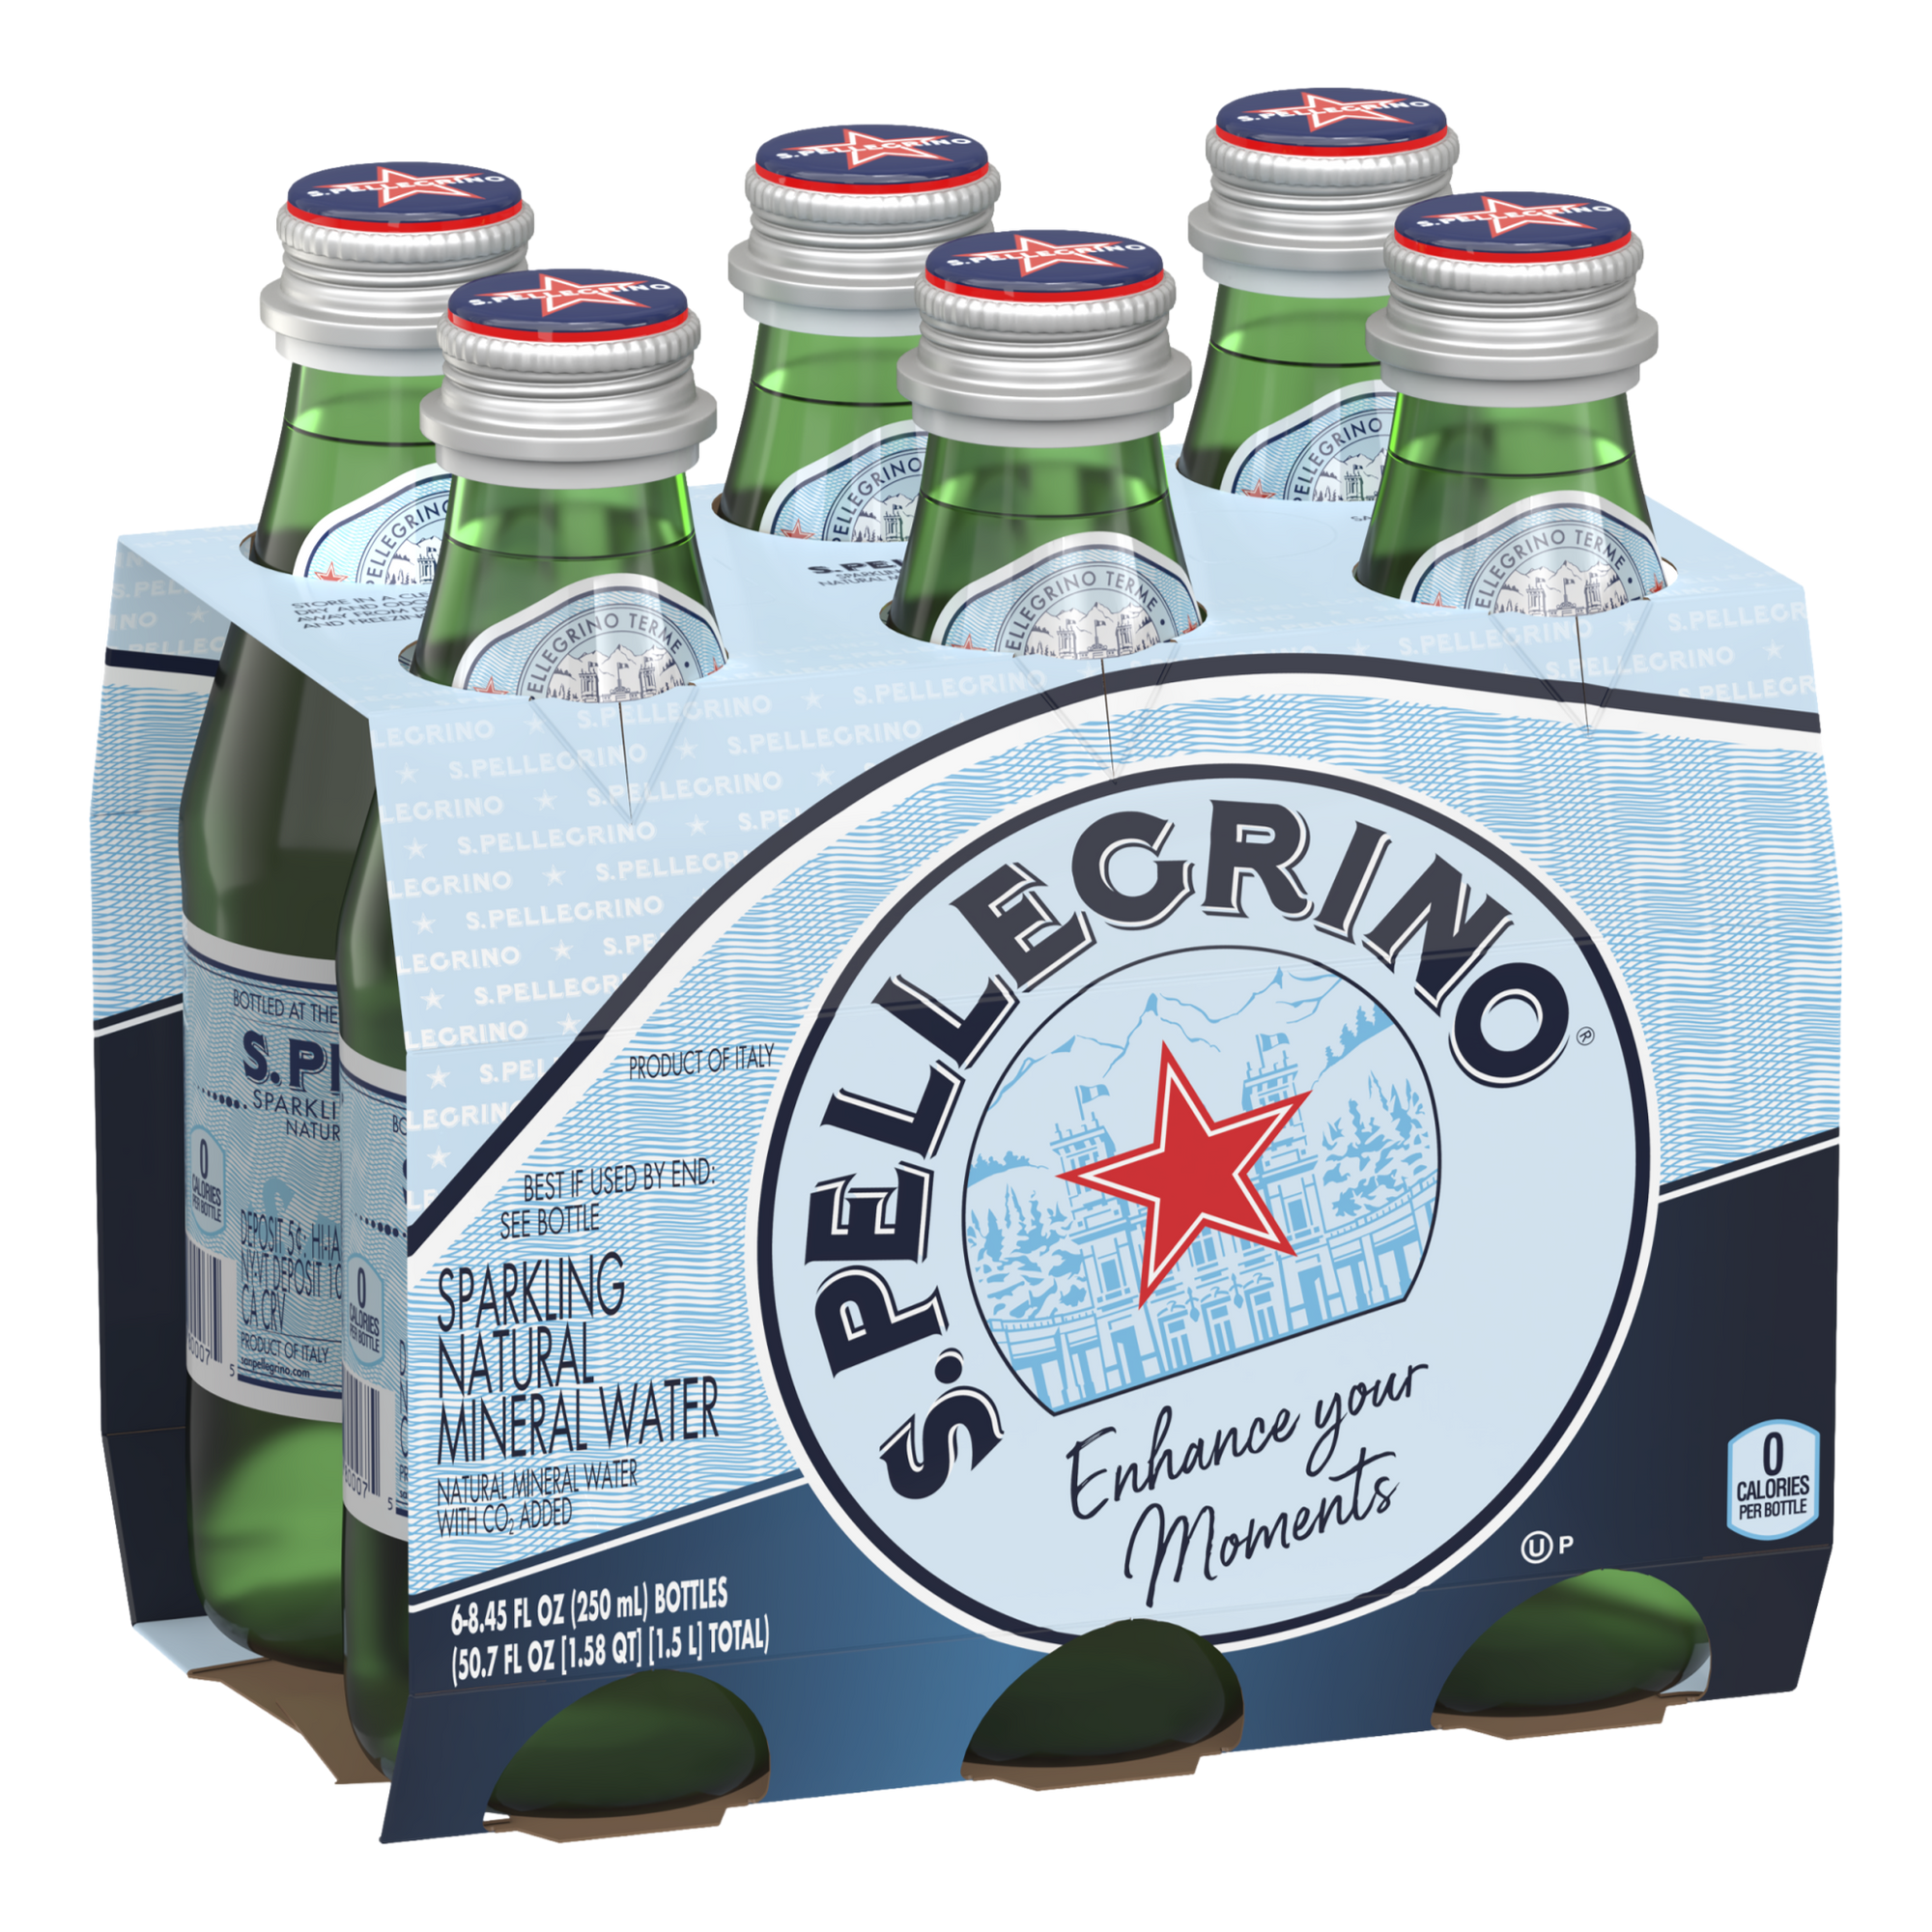 S.Pellegrino Sparkling Natural Mineral Water, 8.45 Fl Oz (pack of 6)